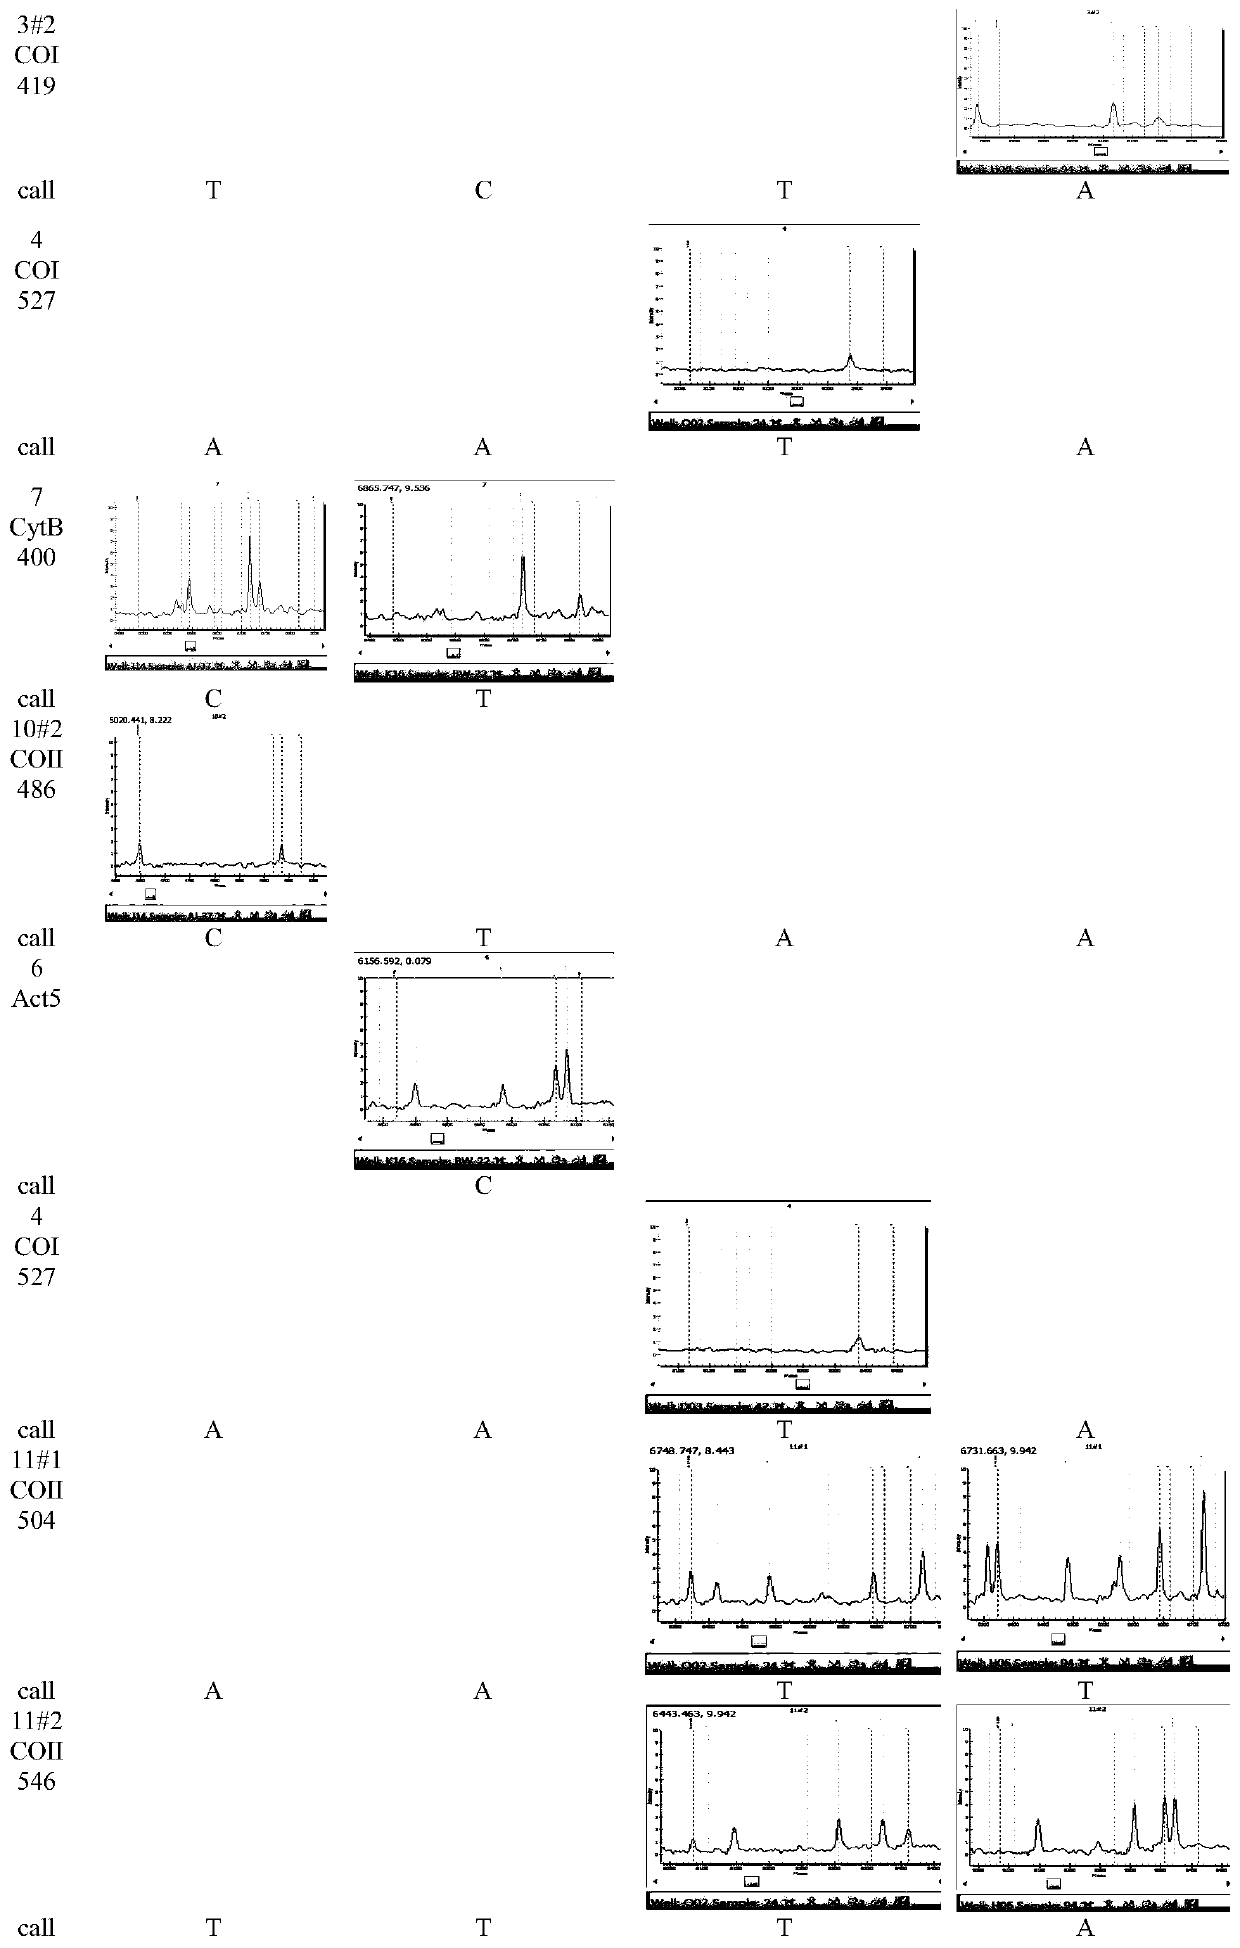 Method for identifying varieties of aedes based on PCR-MS (polymerase chain reaction-mass spectrum) scanning